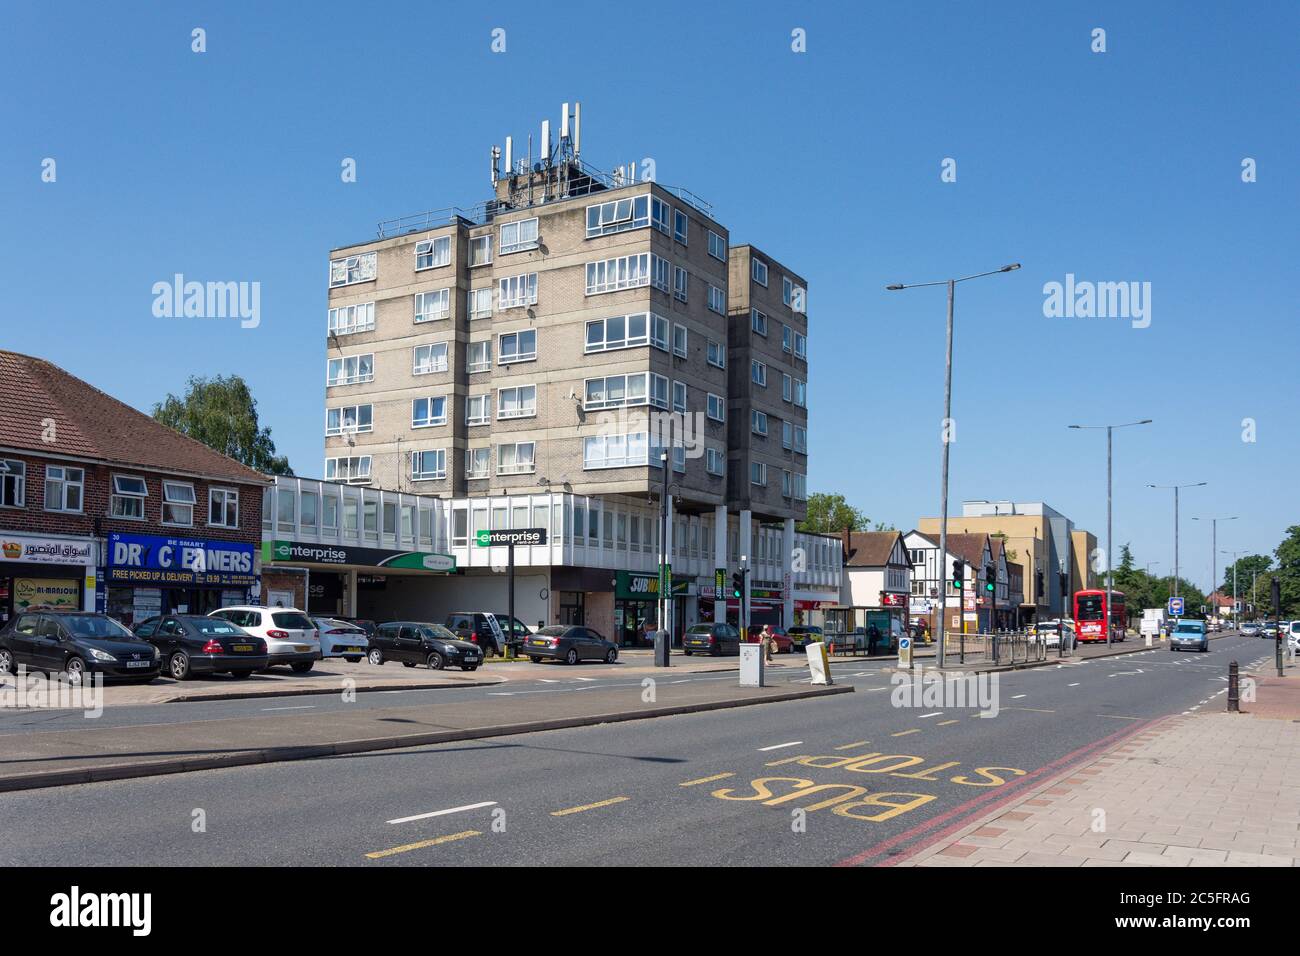 Hampton Road West, Hanworth, London Borough of Hounslow, Greater London, Angleterre, Royaume-Uni Banque D'Images